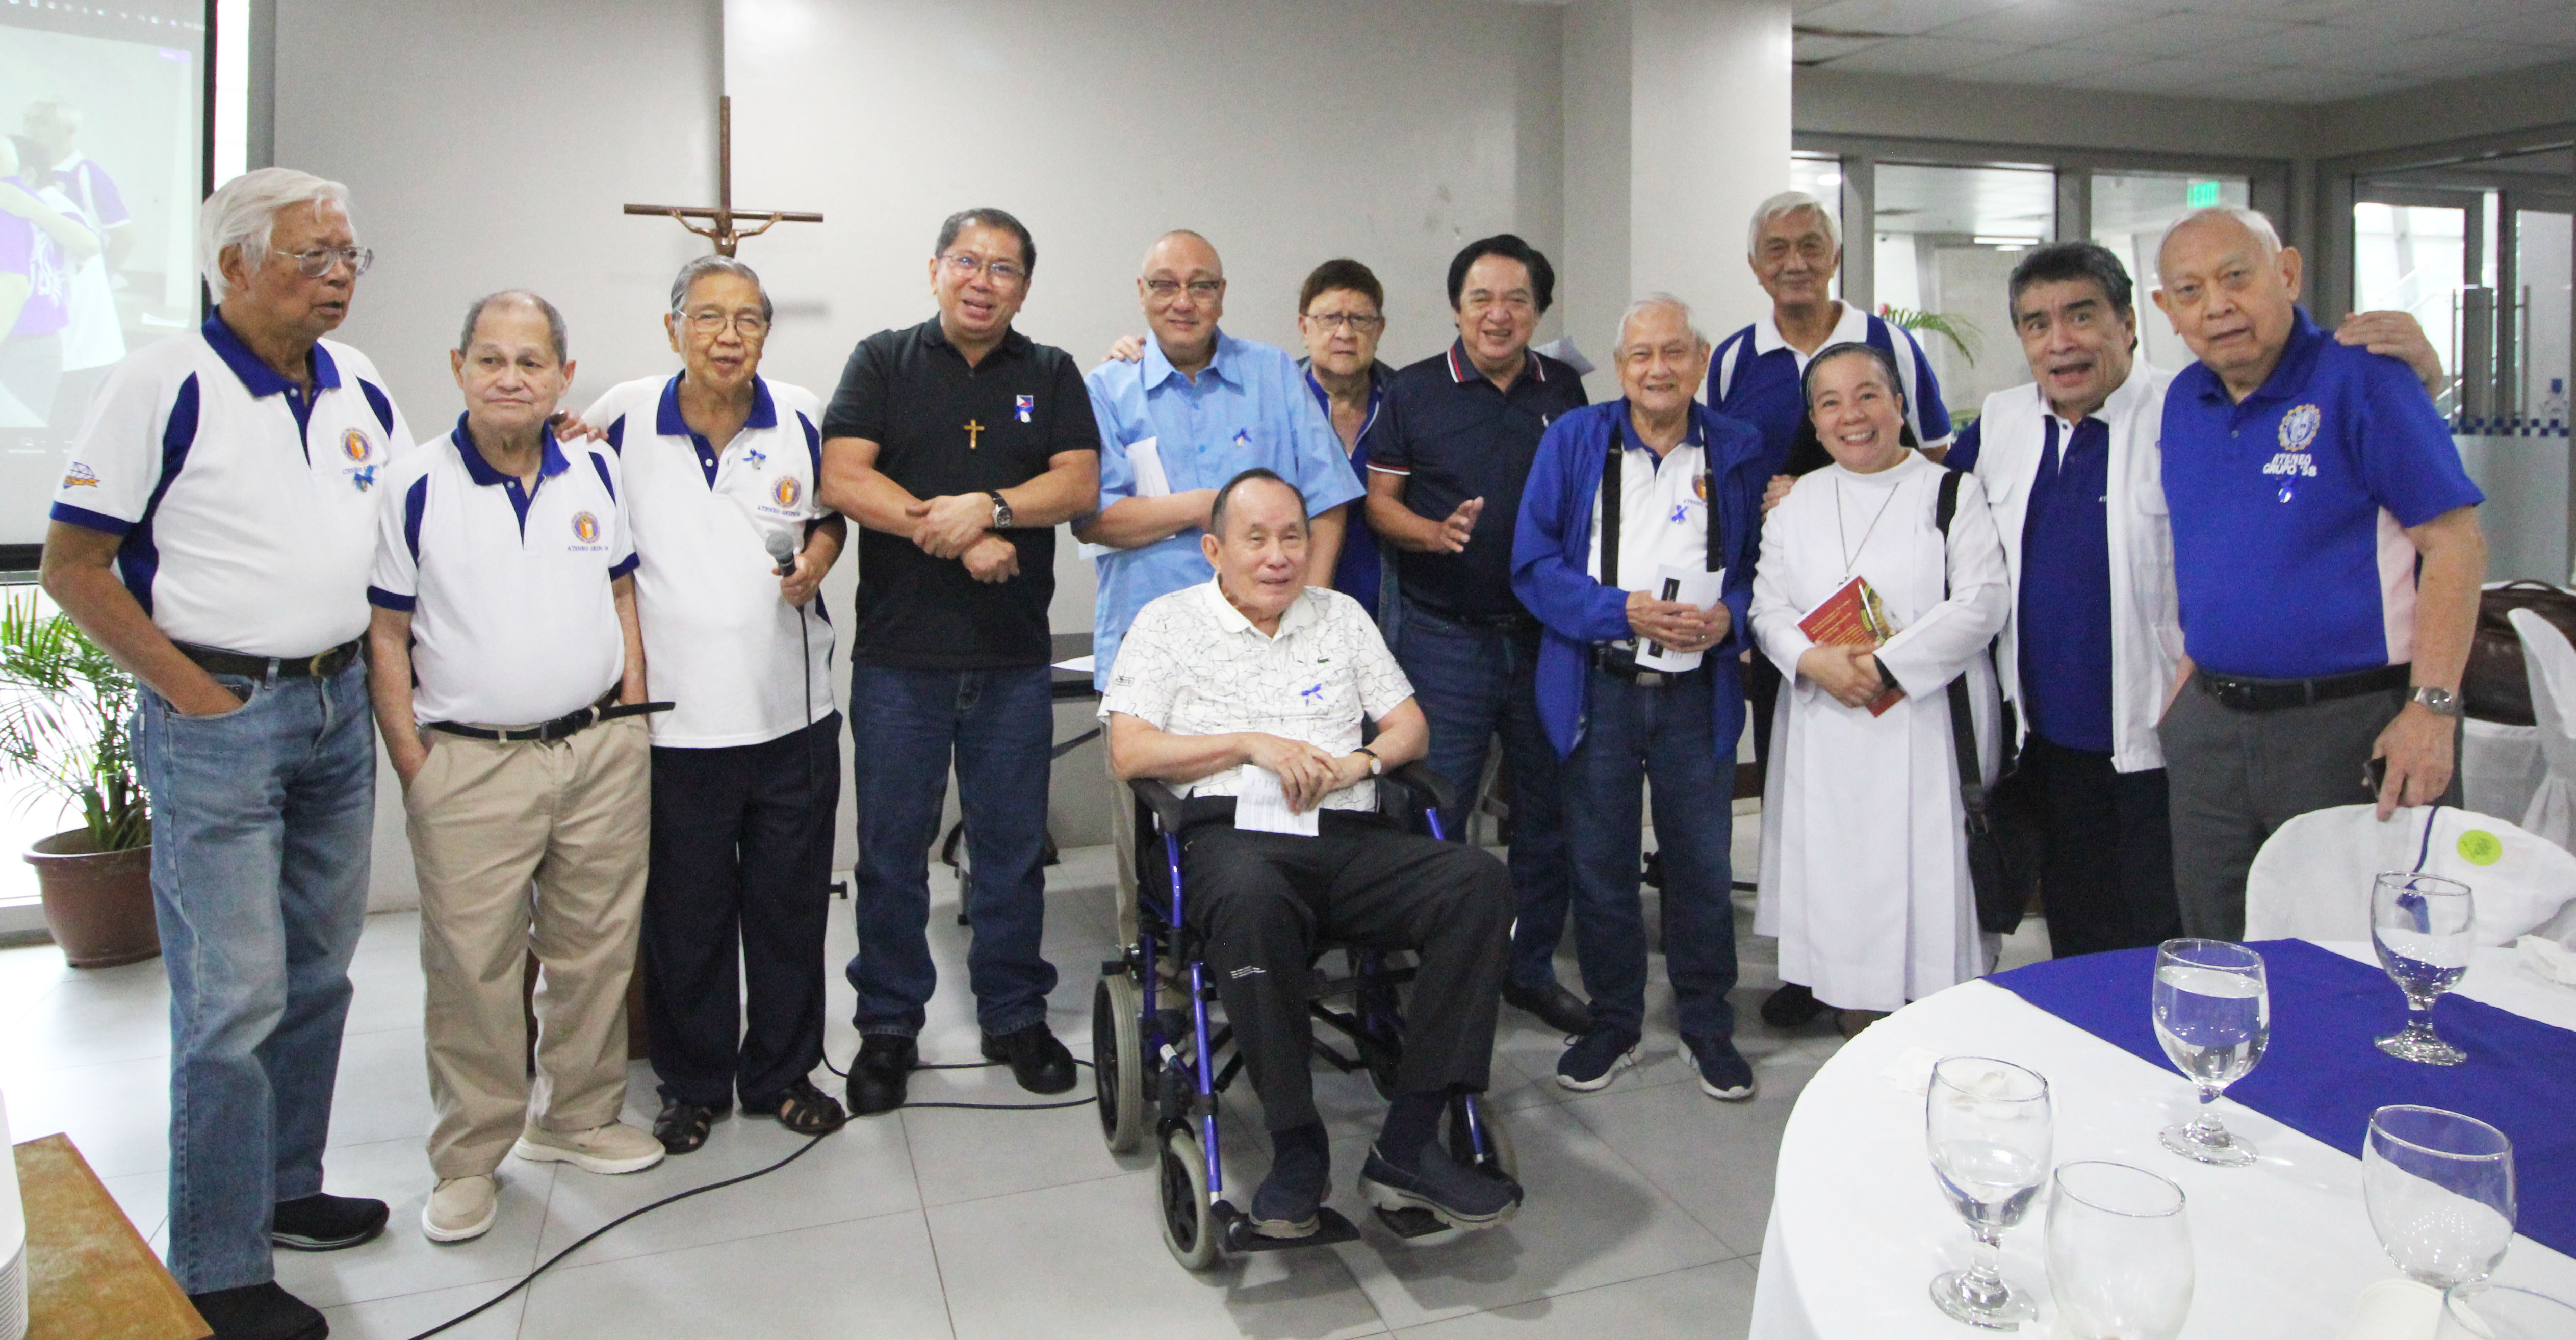 Standing from left to right: Rene Anel, Jimmy Morelos, Timmy Nivera, Fr. Manny Flores SJ, Fr. Kit Bautista SJ, Dodie Agcaoili, Milo Rodrigo, Butch Bonoan, Randy Gavino, Ray Lesaca, and Johnny Romualdez. Seated: Art Ledesma, Chairman of the 65th Ateneo HS Grupo’58 Anniversary and the Grupo’58 Mission of spreding the devotion to the Sacred Heart of Jesus.